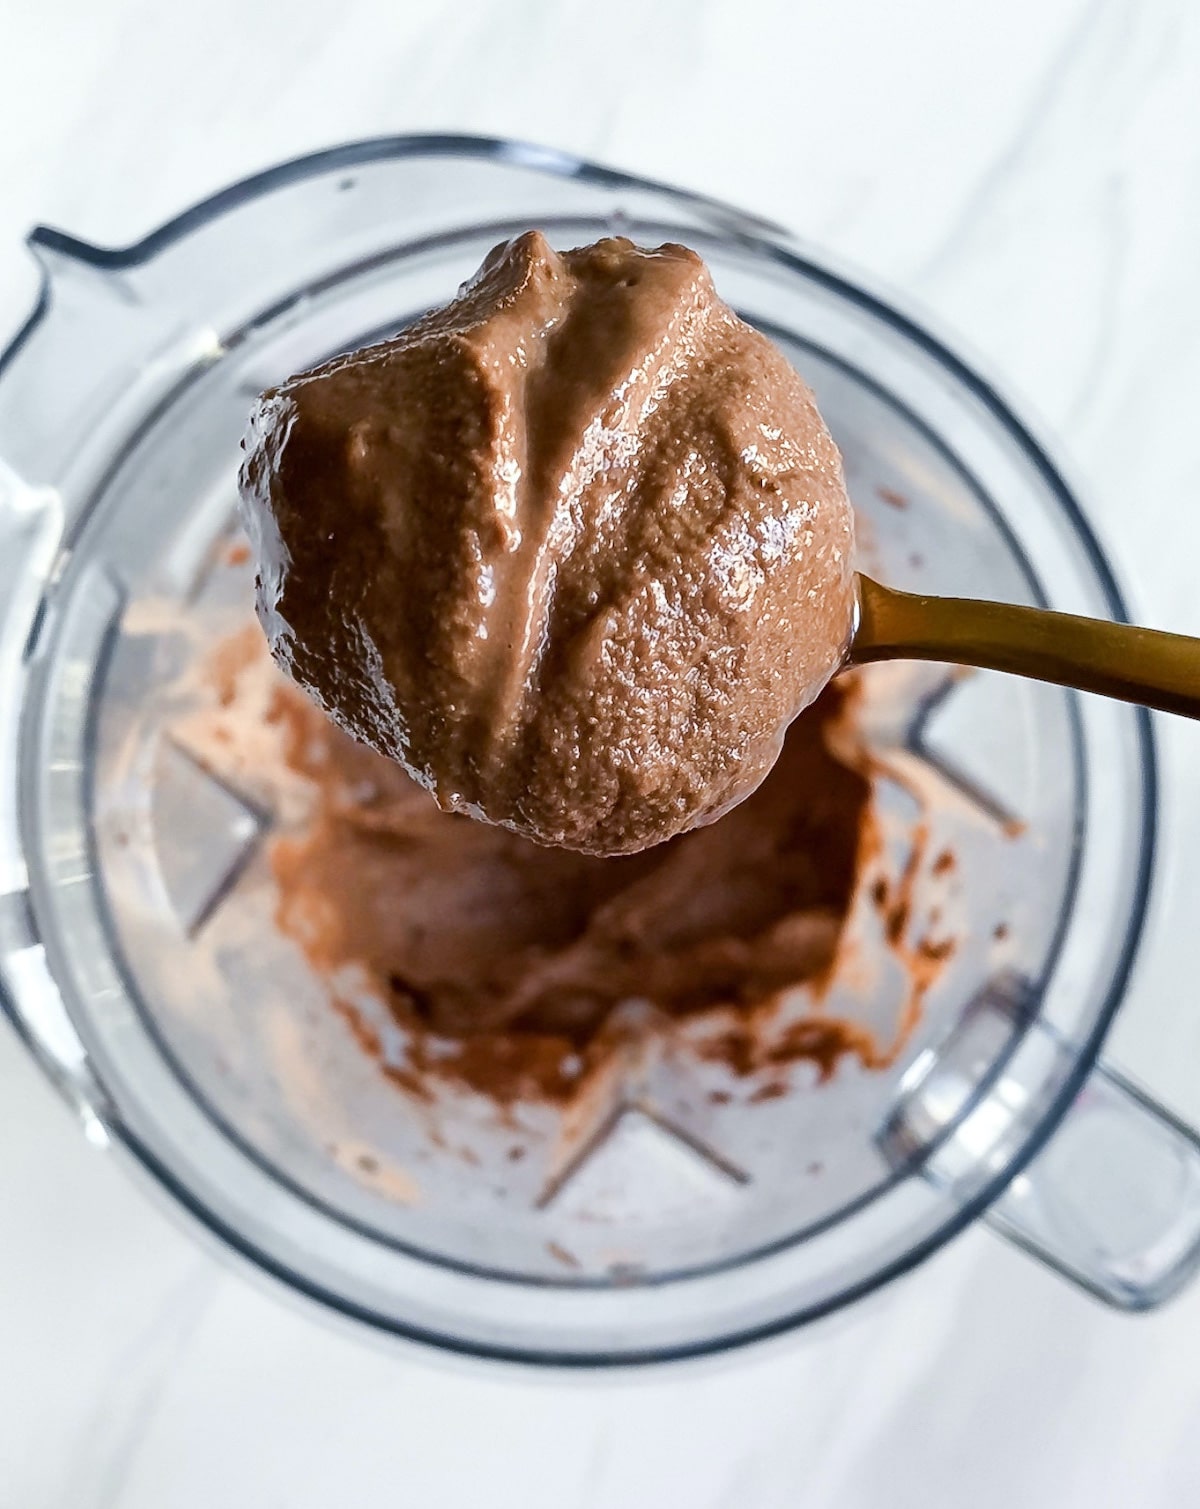 Spoon scooping vegan chocolate ice cream out of blender